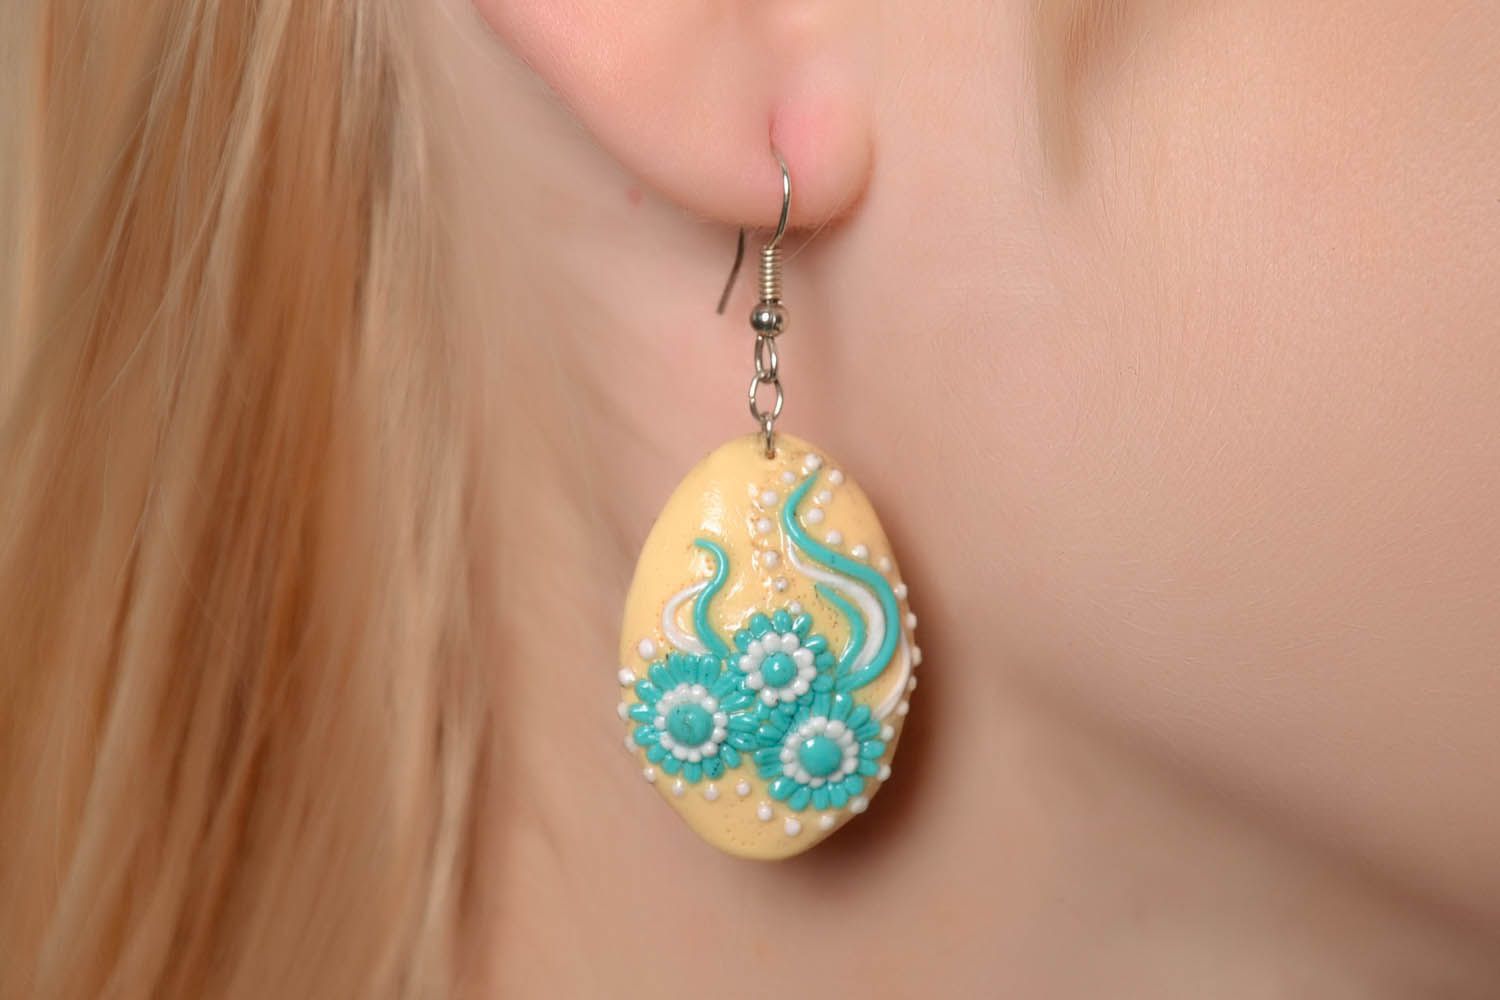 Author's earrings made using filigree technique photo 4